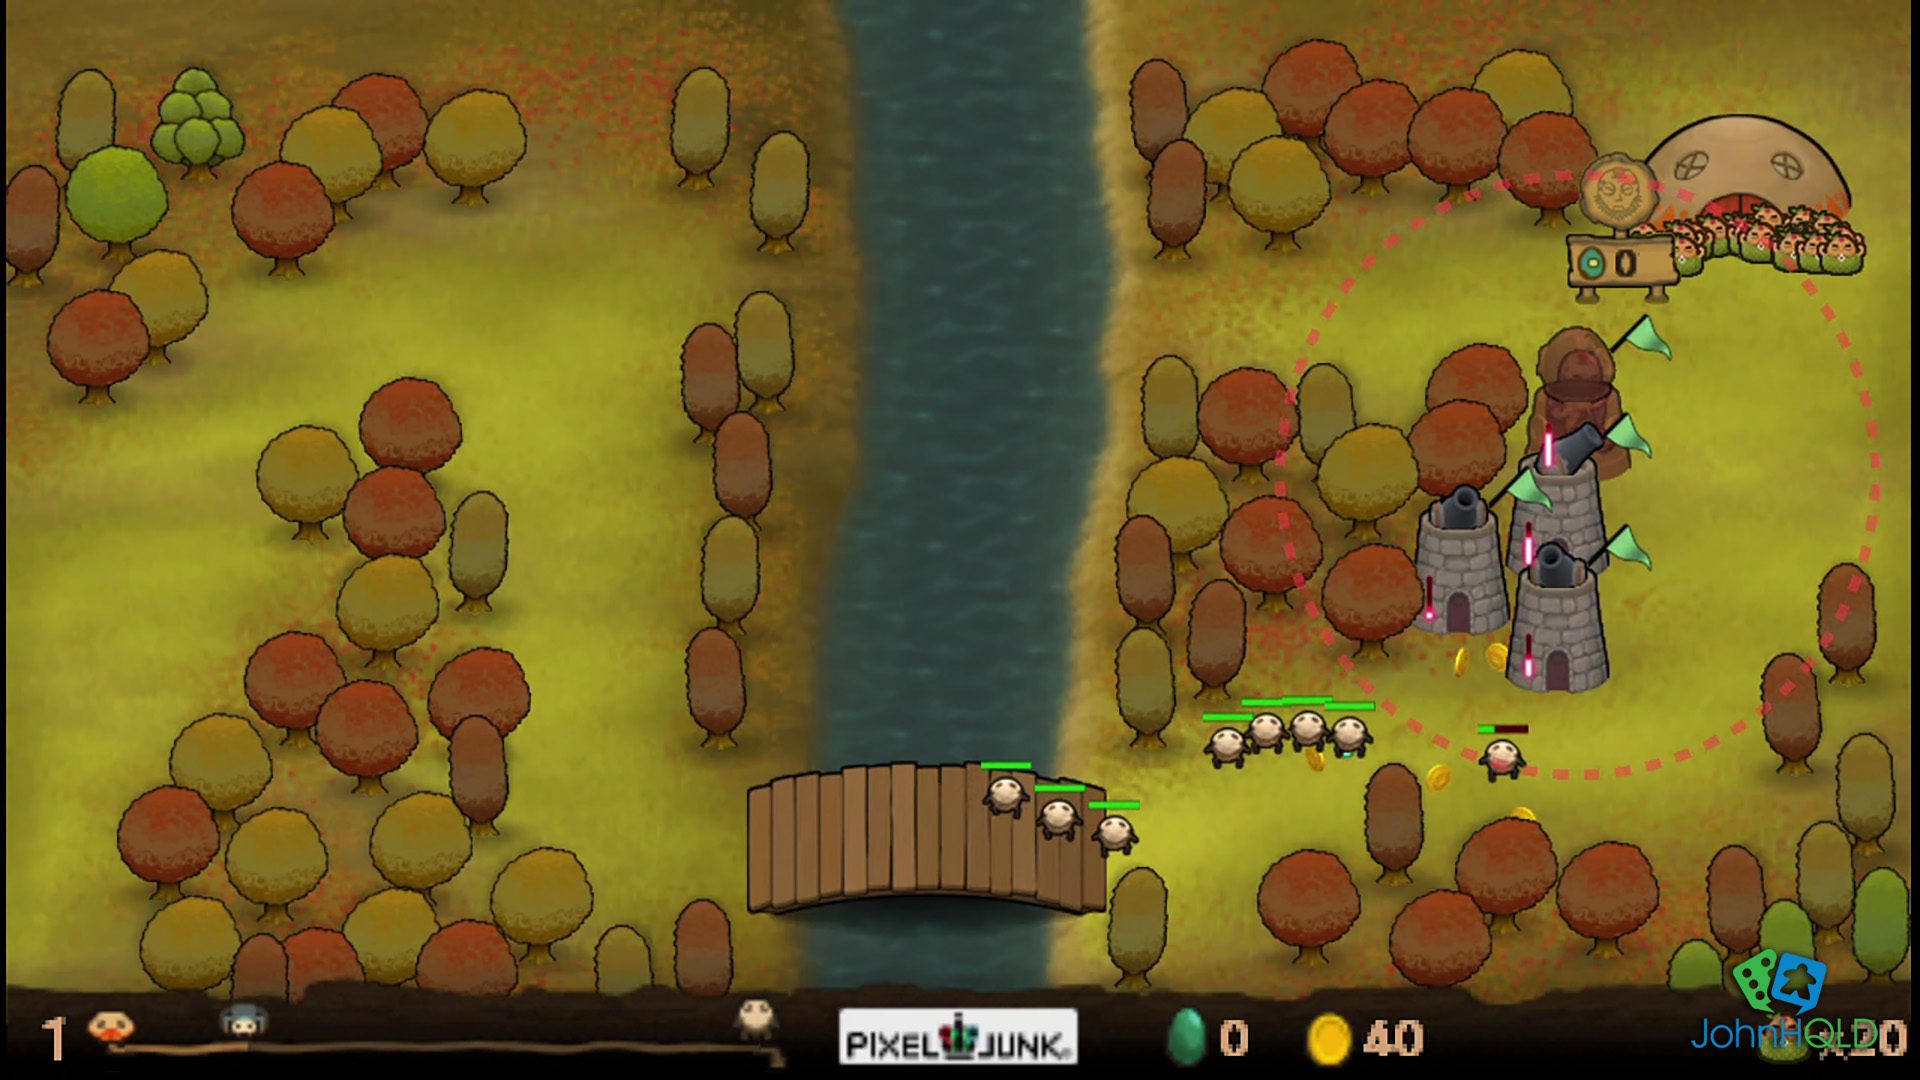 20220919 - Pixeljunk Monsters - Tower defense with a fun twist